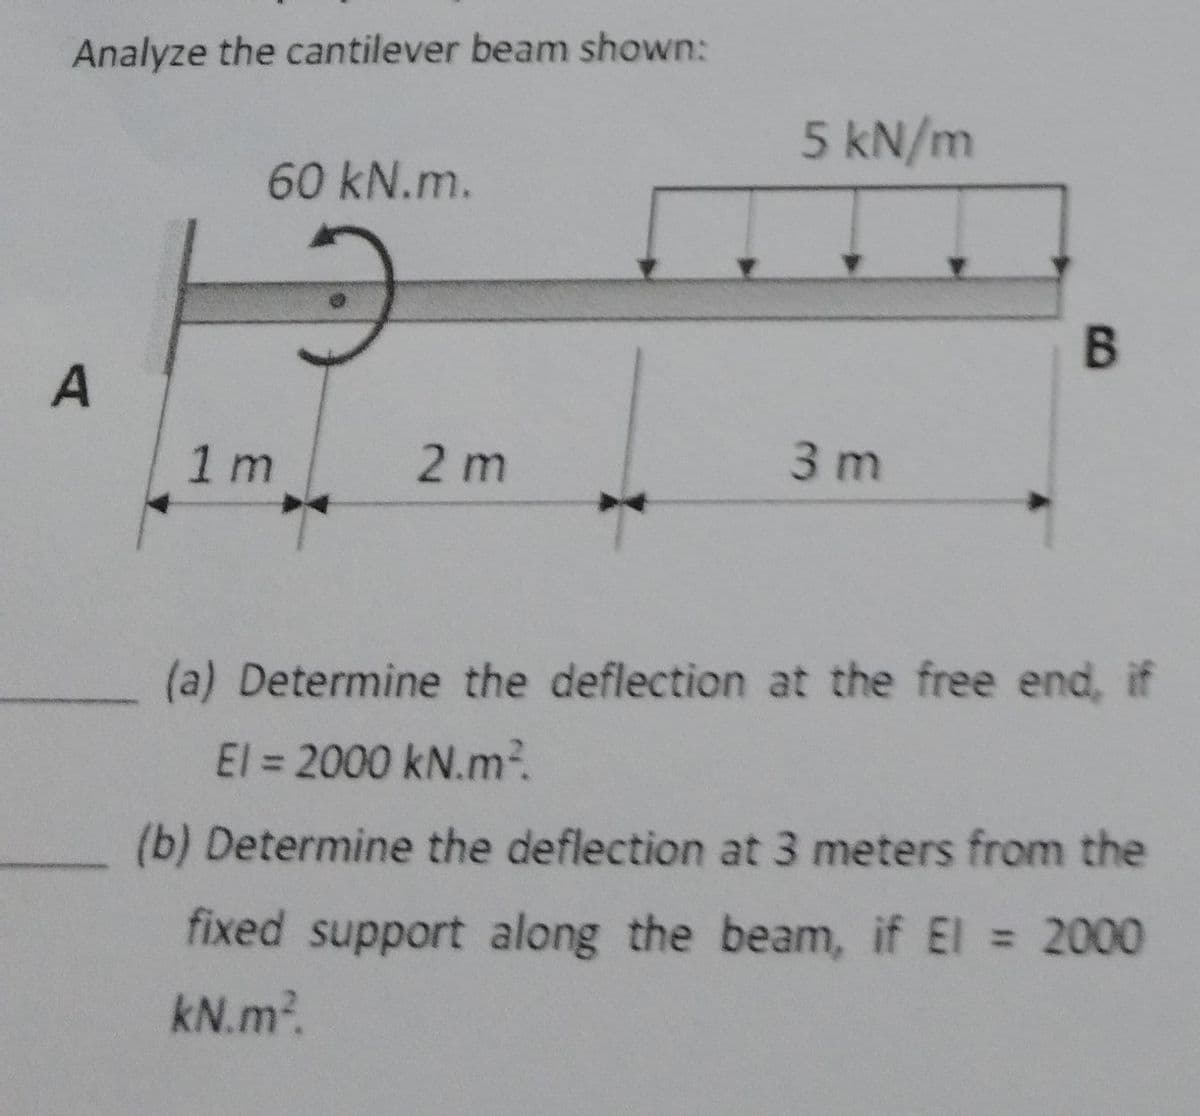 Analyze the cantilever beam shown:
60 kN.m.
5 kN/m
B
A
1 m
2 m
3 m
(a) Determine the deflection at the free end, if
El = 2000 kN.m²
(b) Determine the deflection at 3 meters from the
fixed support along the beam, if El 2000
kN.m².